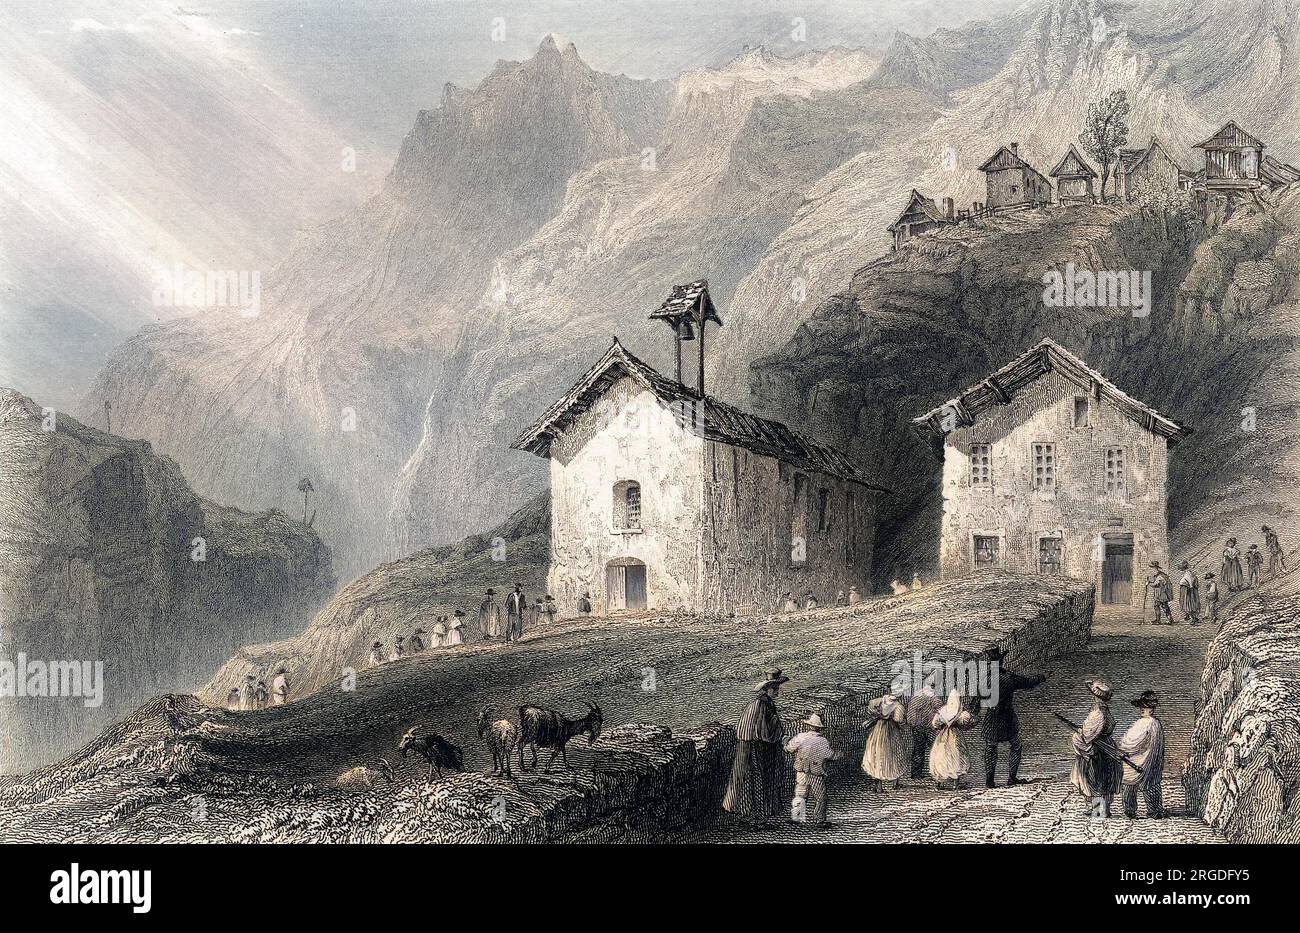 The church and school of Felix Neff, k.a. the Pastor of the High Alps, a Swiss ex-soldier who became a priest and philanthropist in this underprivileged district. Stock Photo